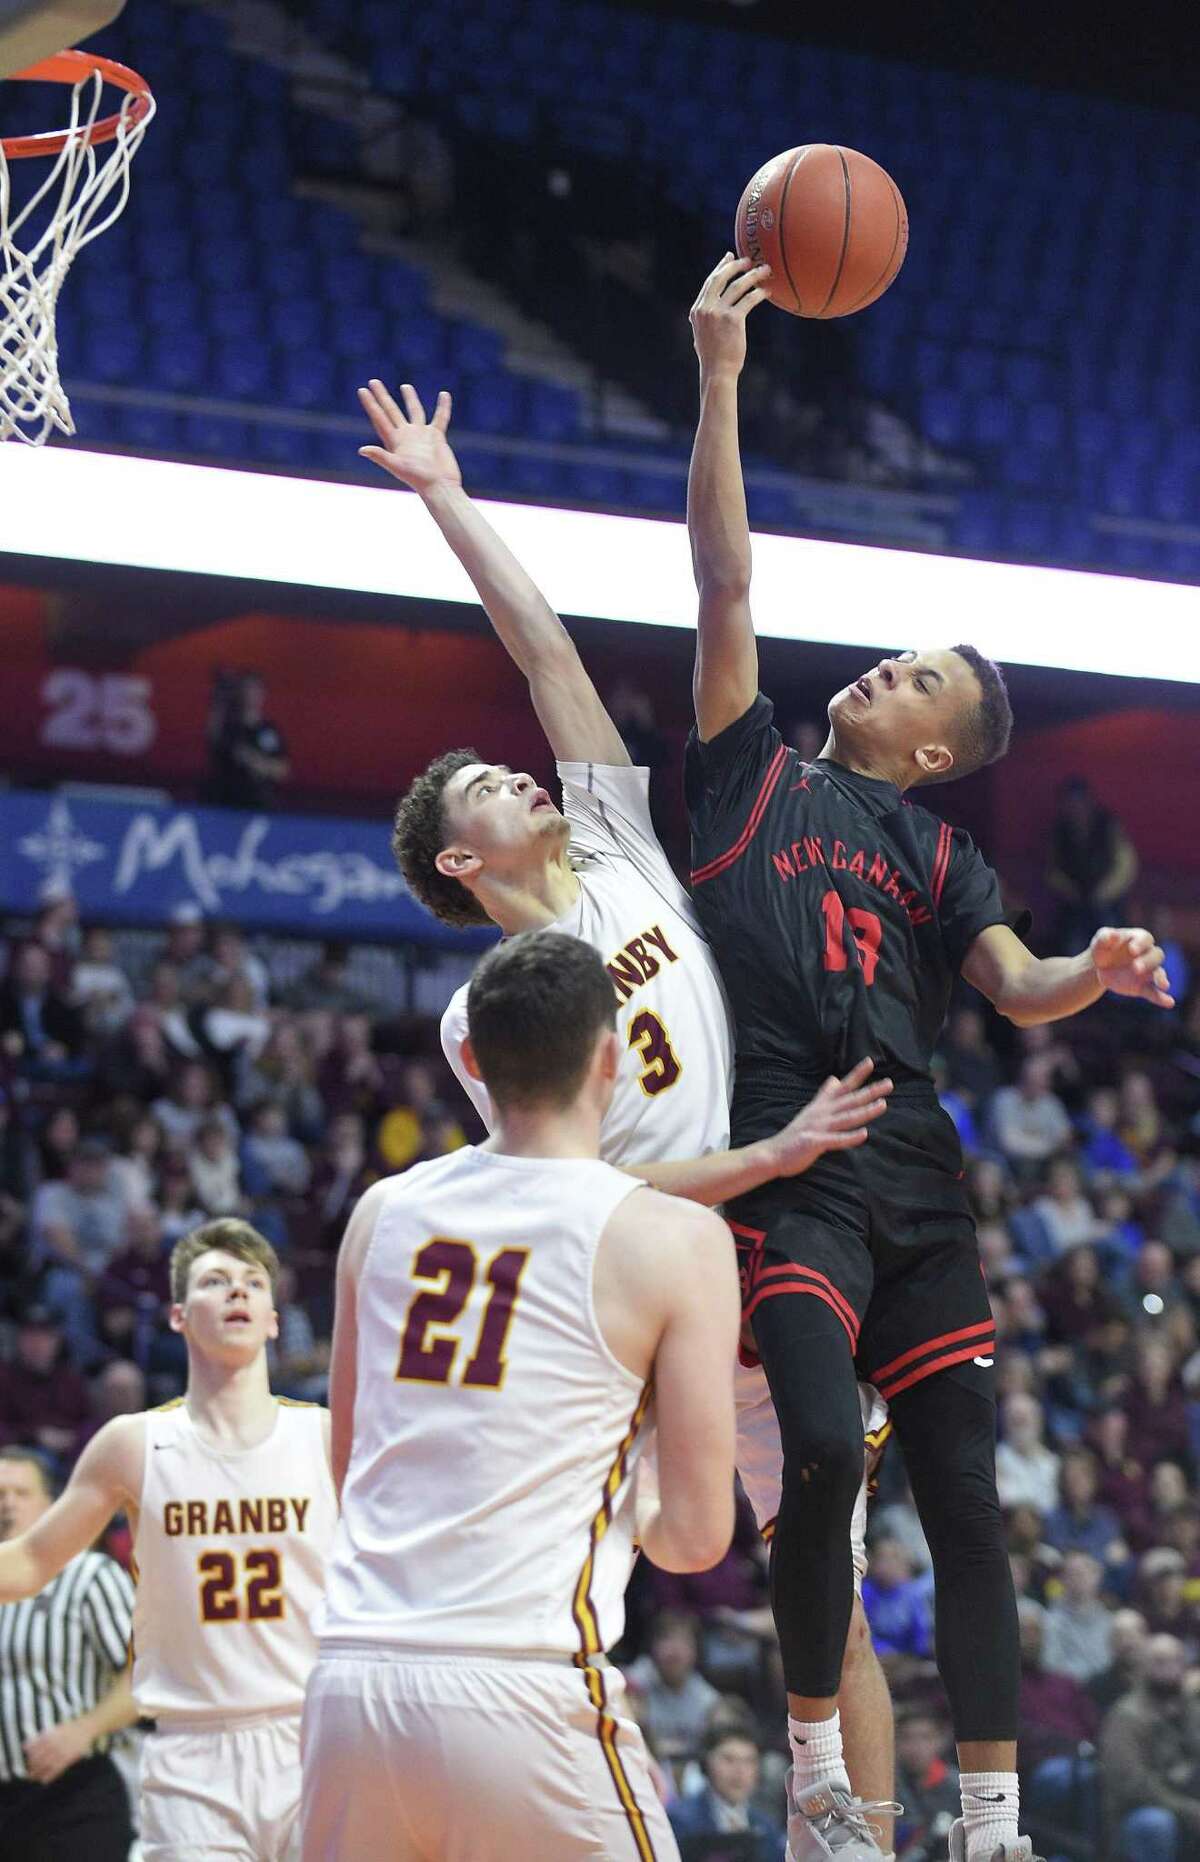 New Canaan’s Luke Rwambuya (13) finger rolls a shot against Gramby’s Elliyas Delaire (3) in the second half of the CIAC Division IV finals at Mohegan Sun Arena in Uncasville on Saturday. New Canaan defeated Gramby 55-39.